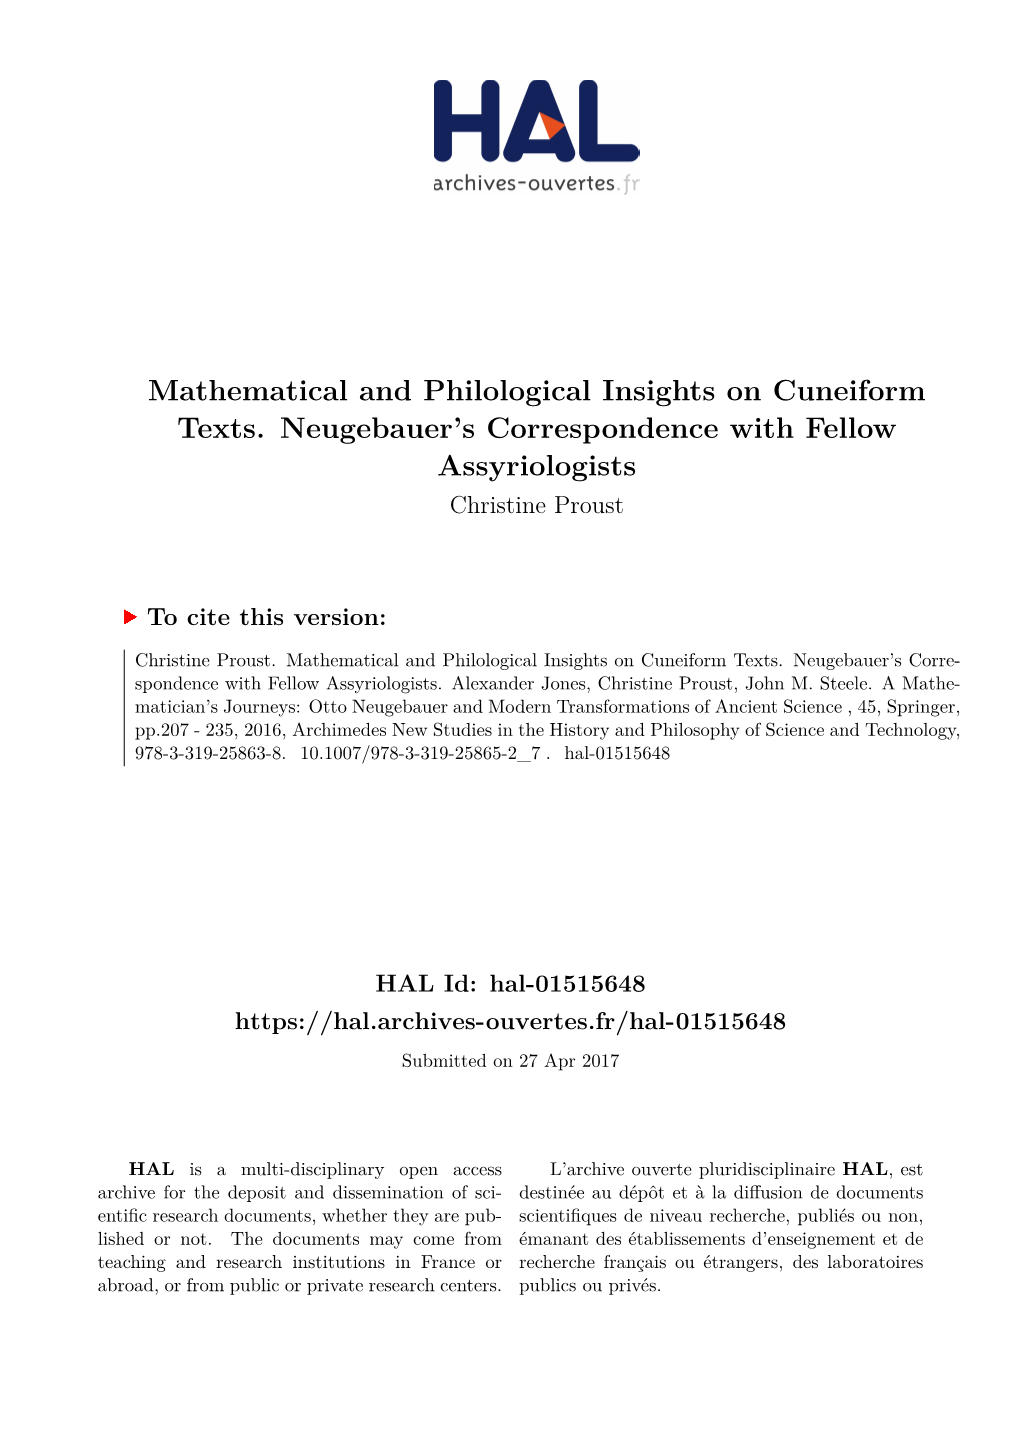 Mathematical and Philological Insights on Cuneiform Texts. Neugebauer's